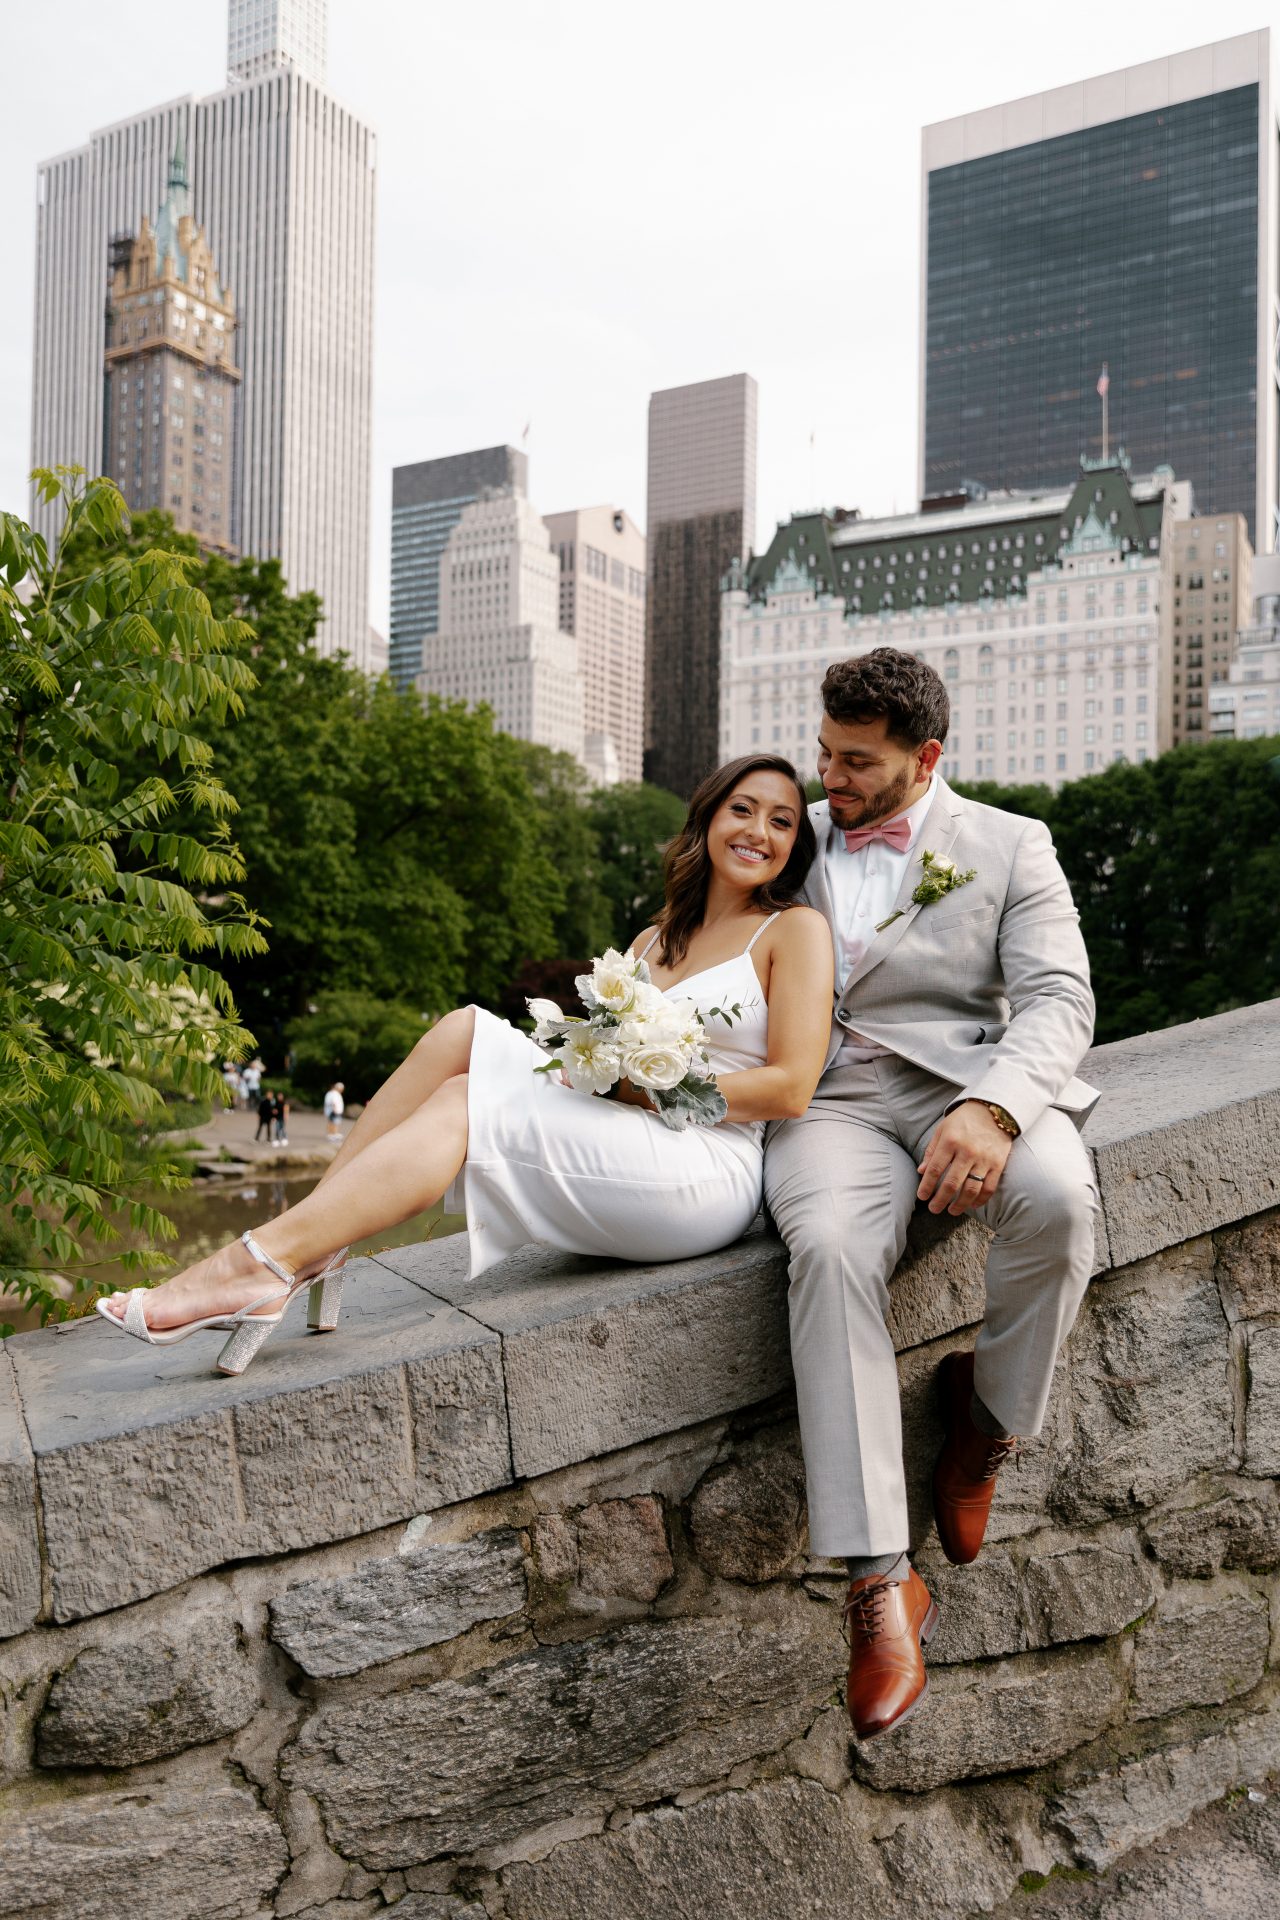 Simple wedding in Central Park NY 22